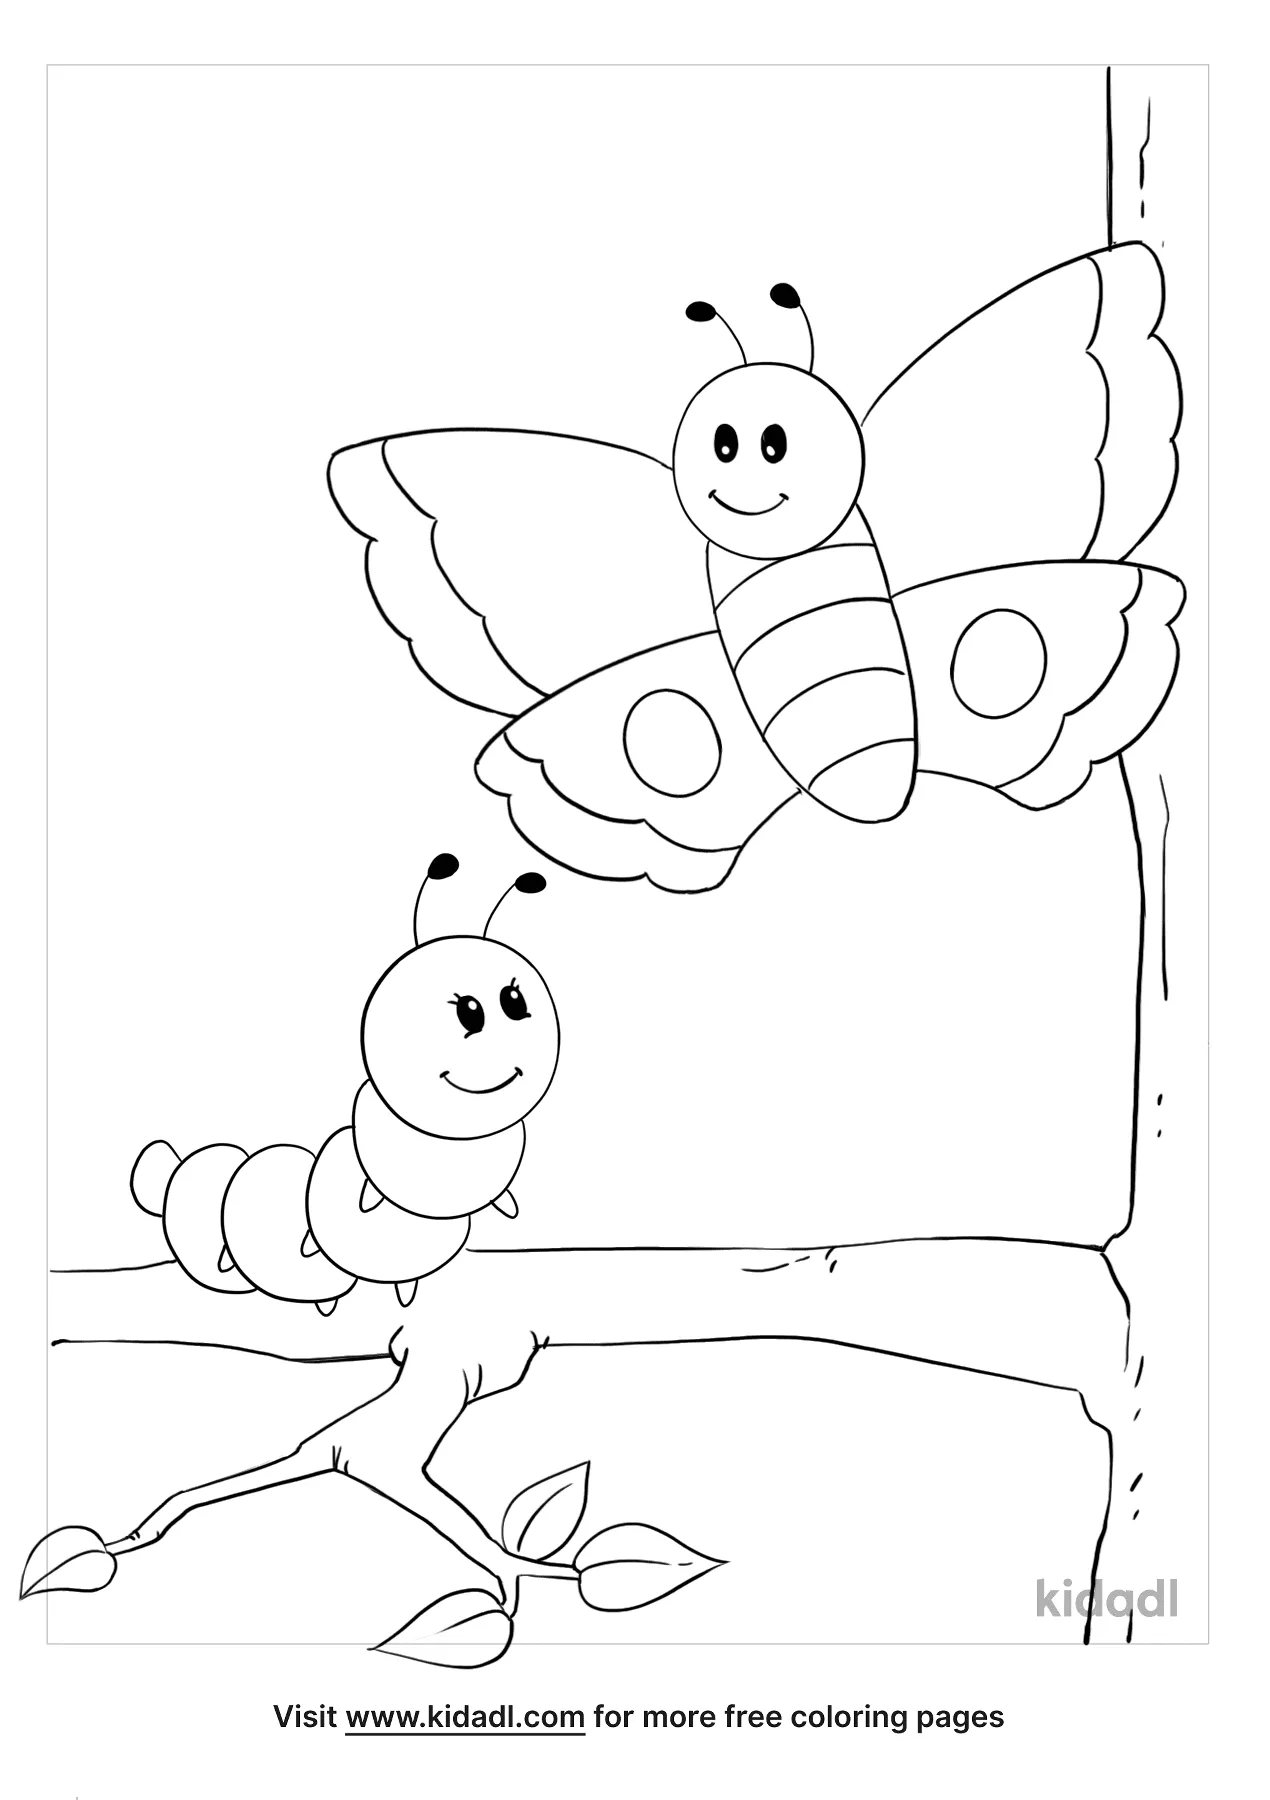 Caterpillar To Butterfly Coloring Pages   Free Bugs Coloring Pages ...